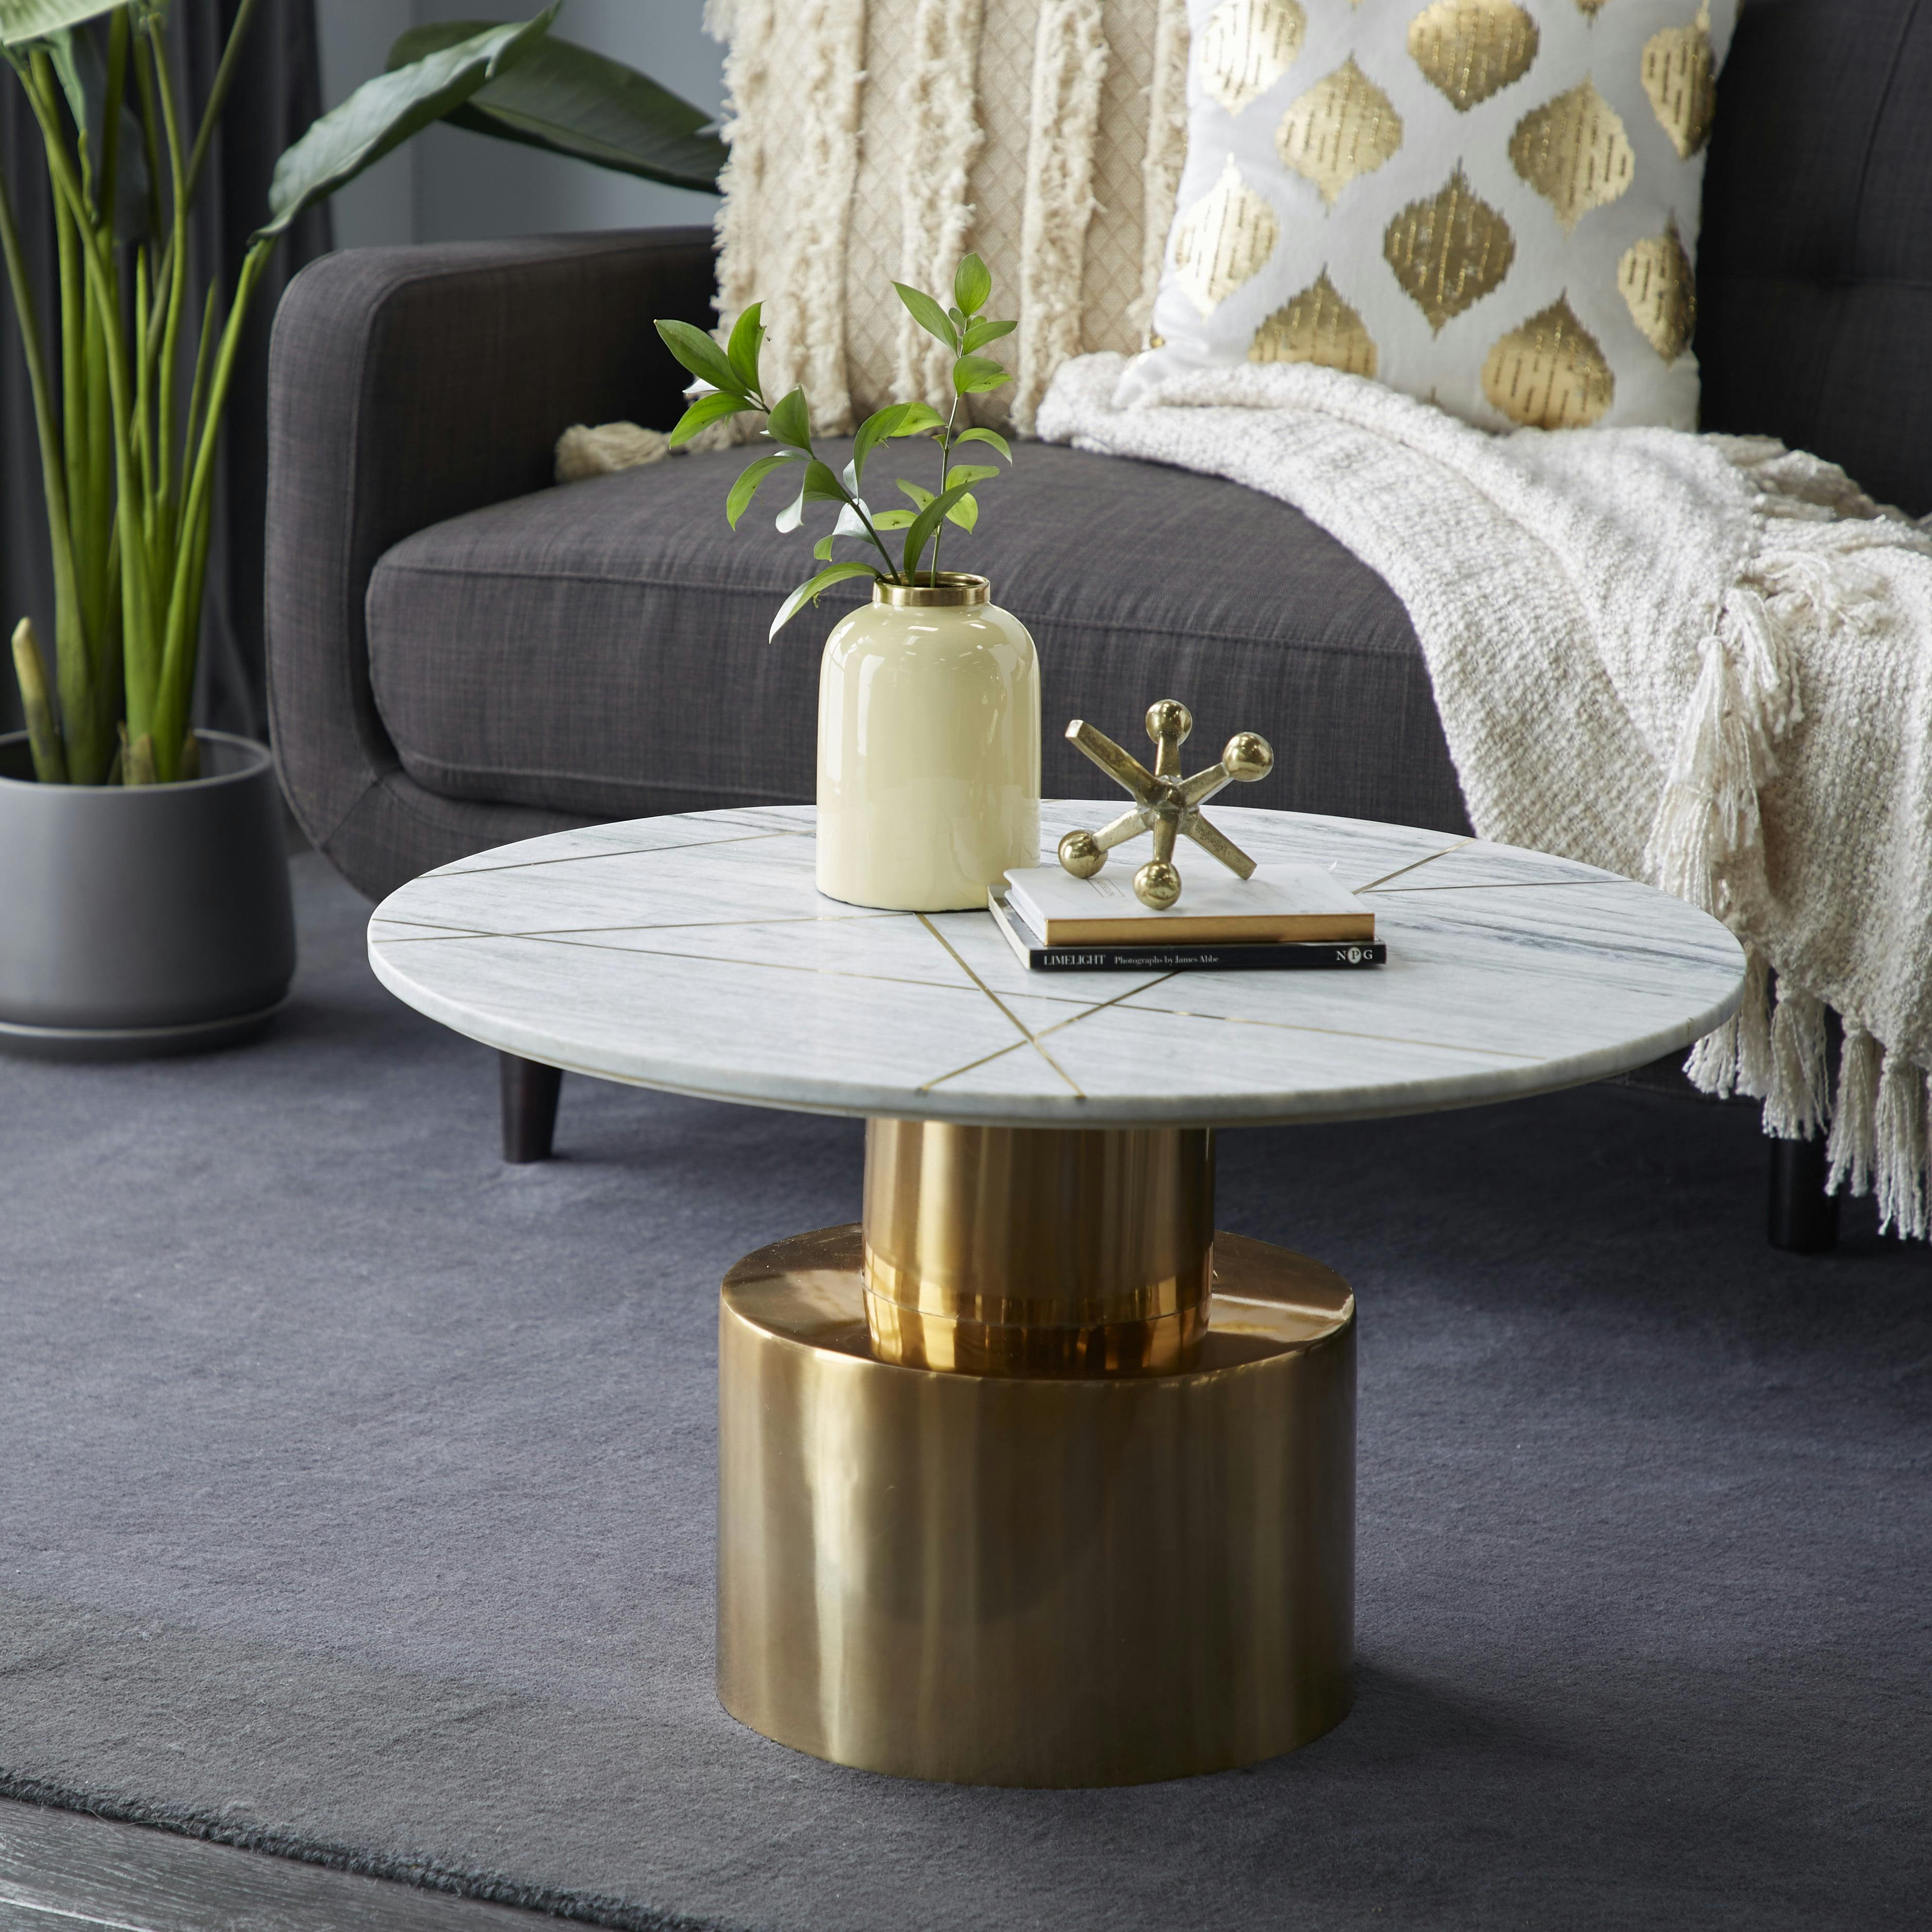 Elegant 30.5" Round Marble Coffee Table with Gold Inlay and Stainless Steel Base